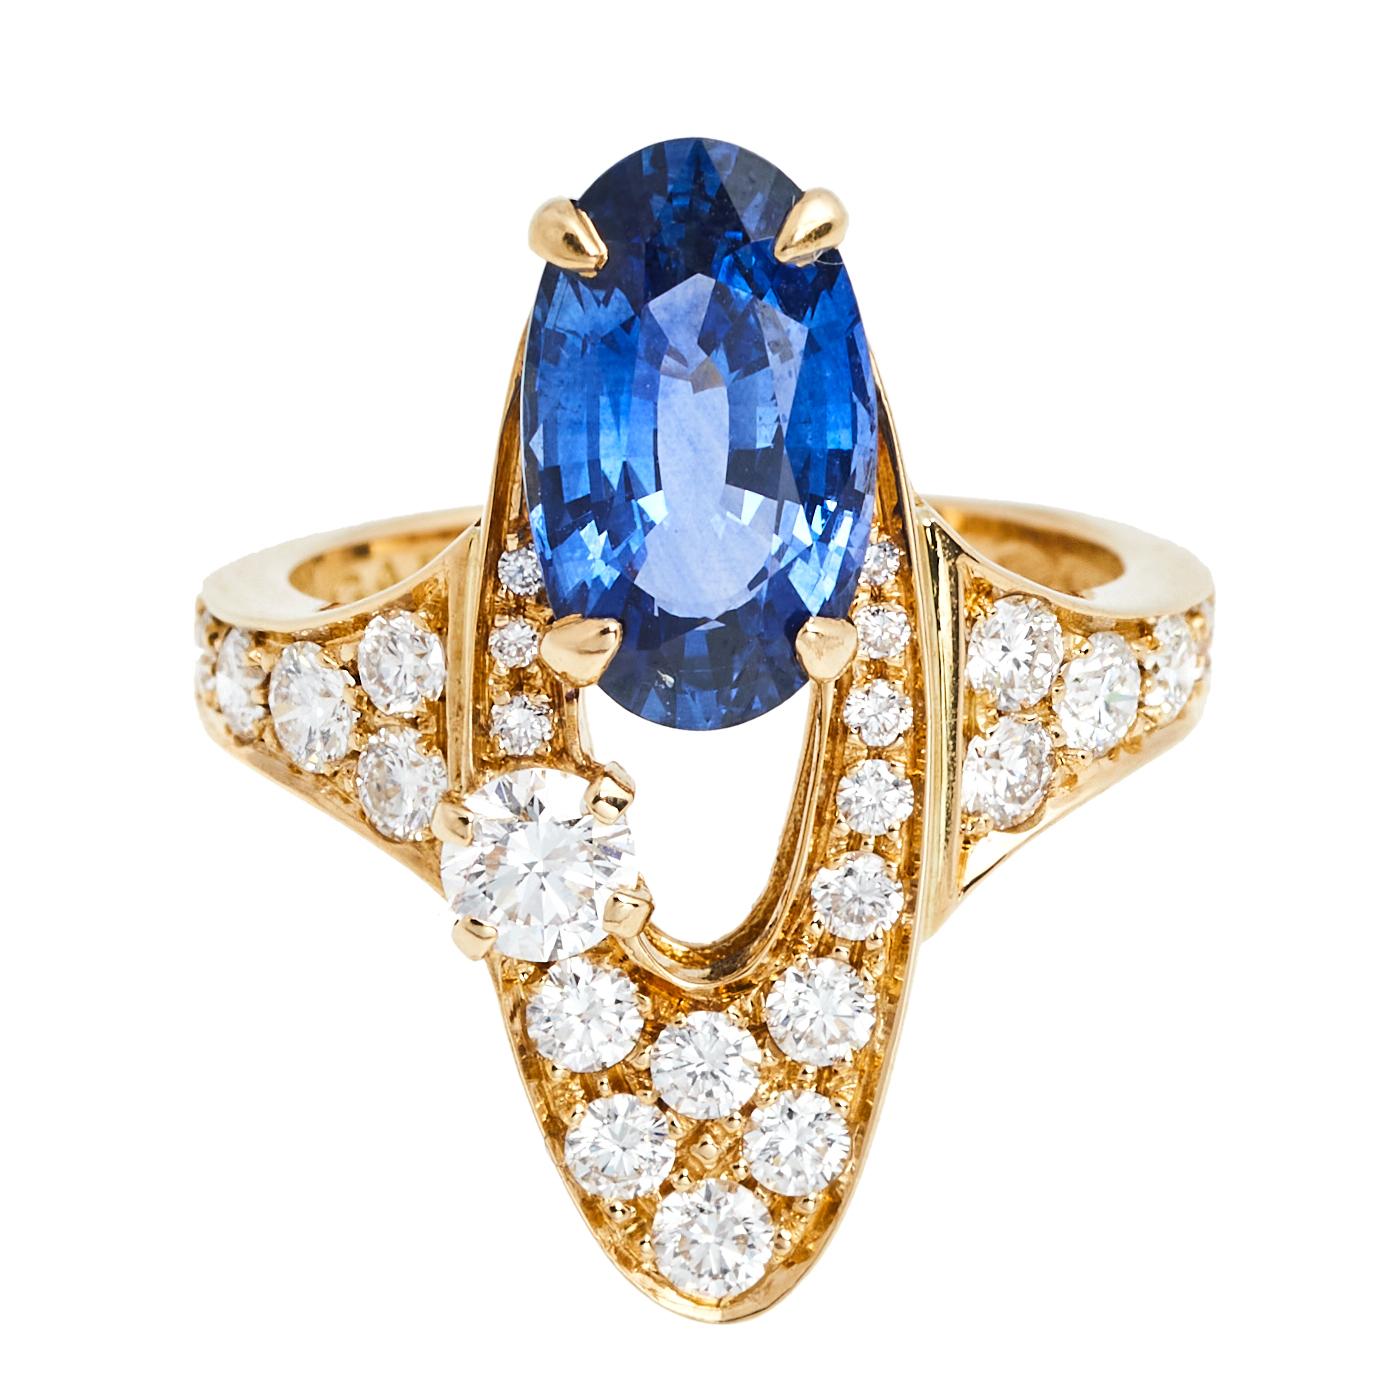 This exquisite Elisia ring by Bvlgari is made from 18K yellow gold. It is endowed with an oval-shaped head that holds a breathtaking sapphire and a large diamond, accompanied by an assembly of small diamonds.

Includes: Original Box, Original Case
